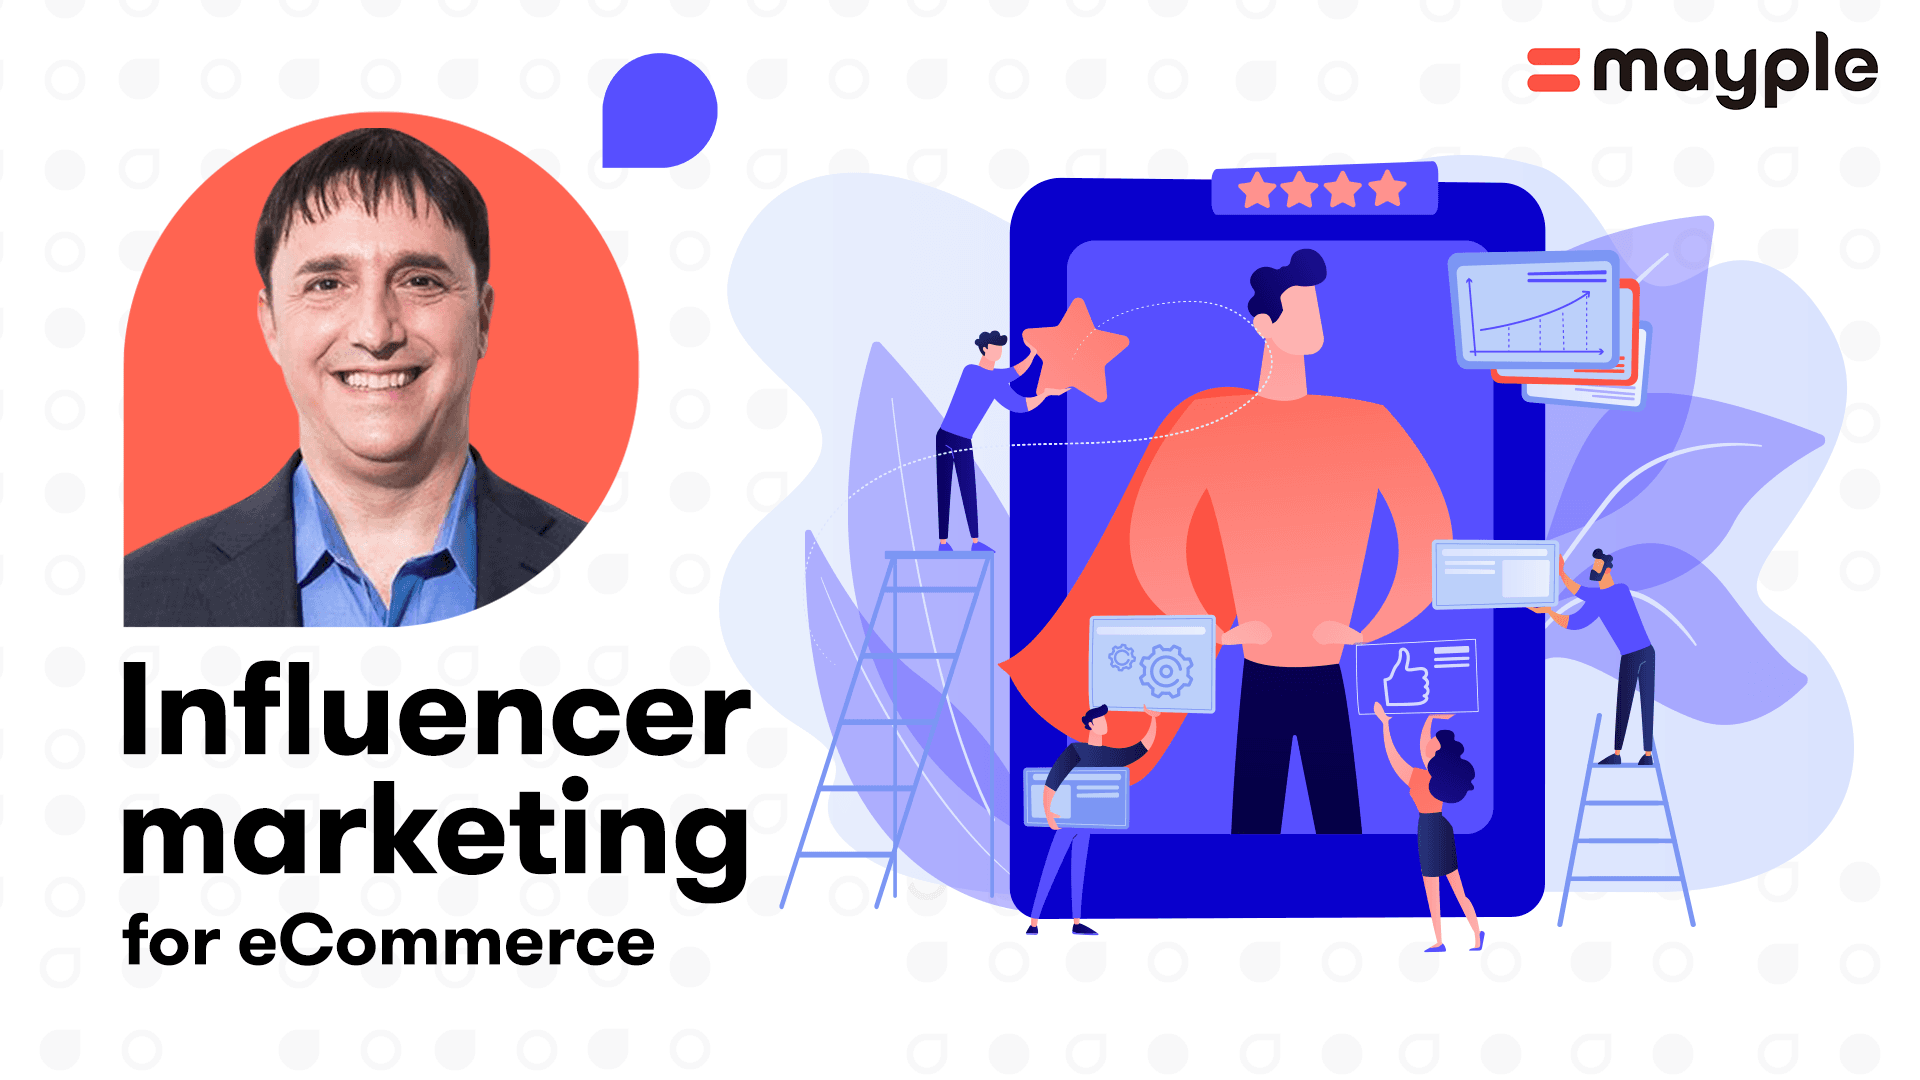 neal schaffer interview about influencer marketing for eCommerce